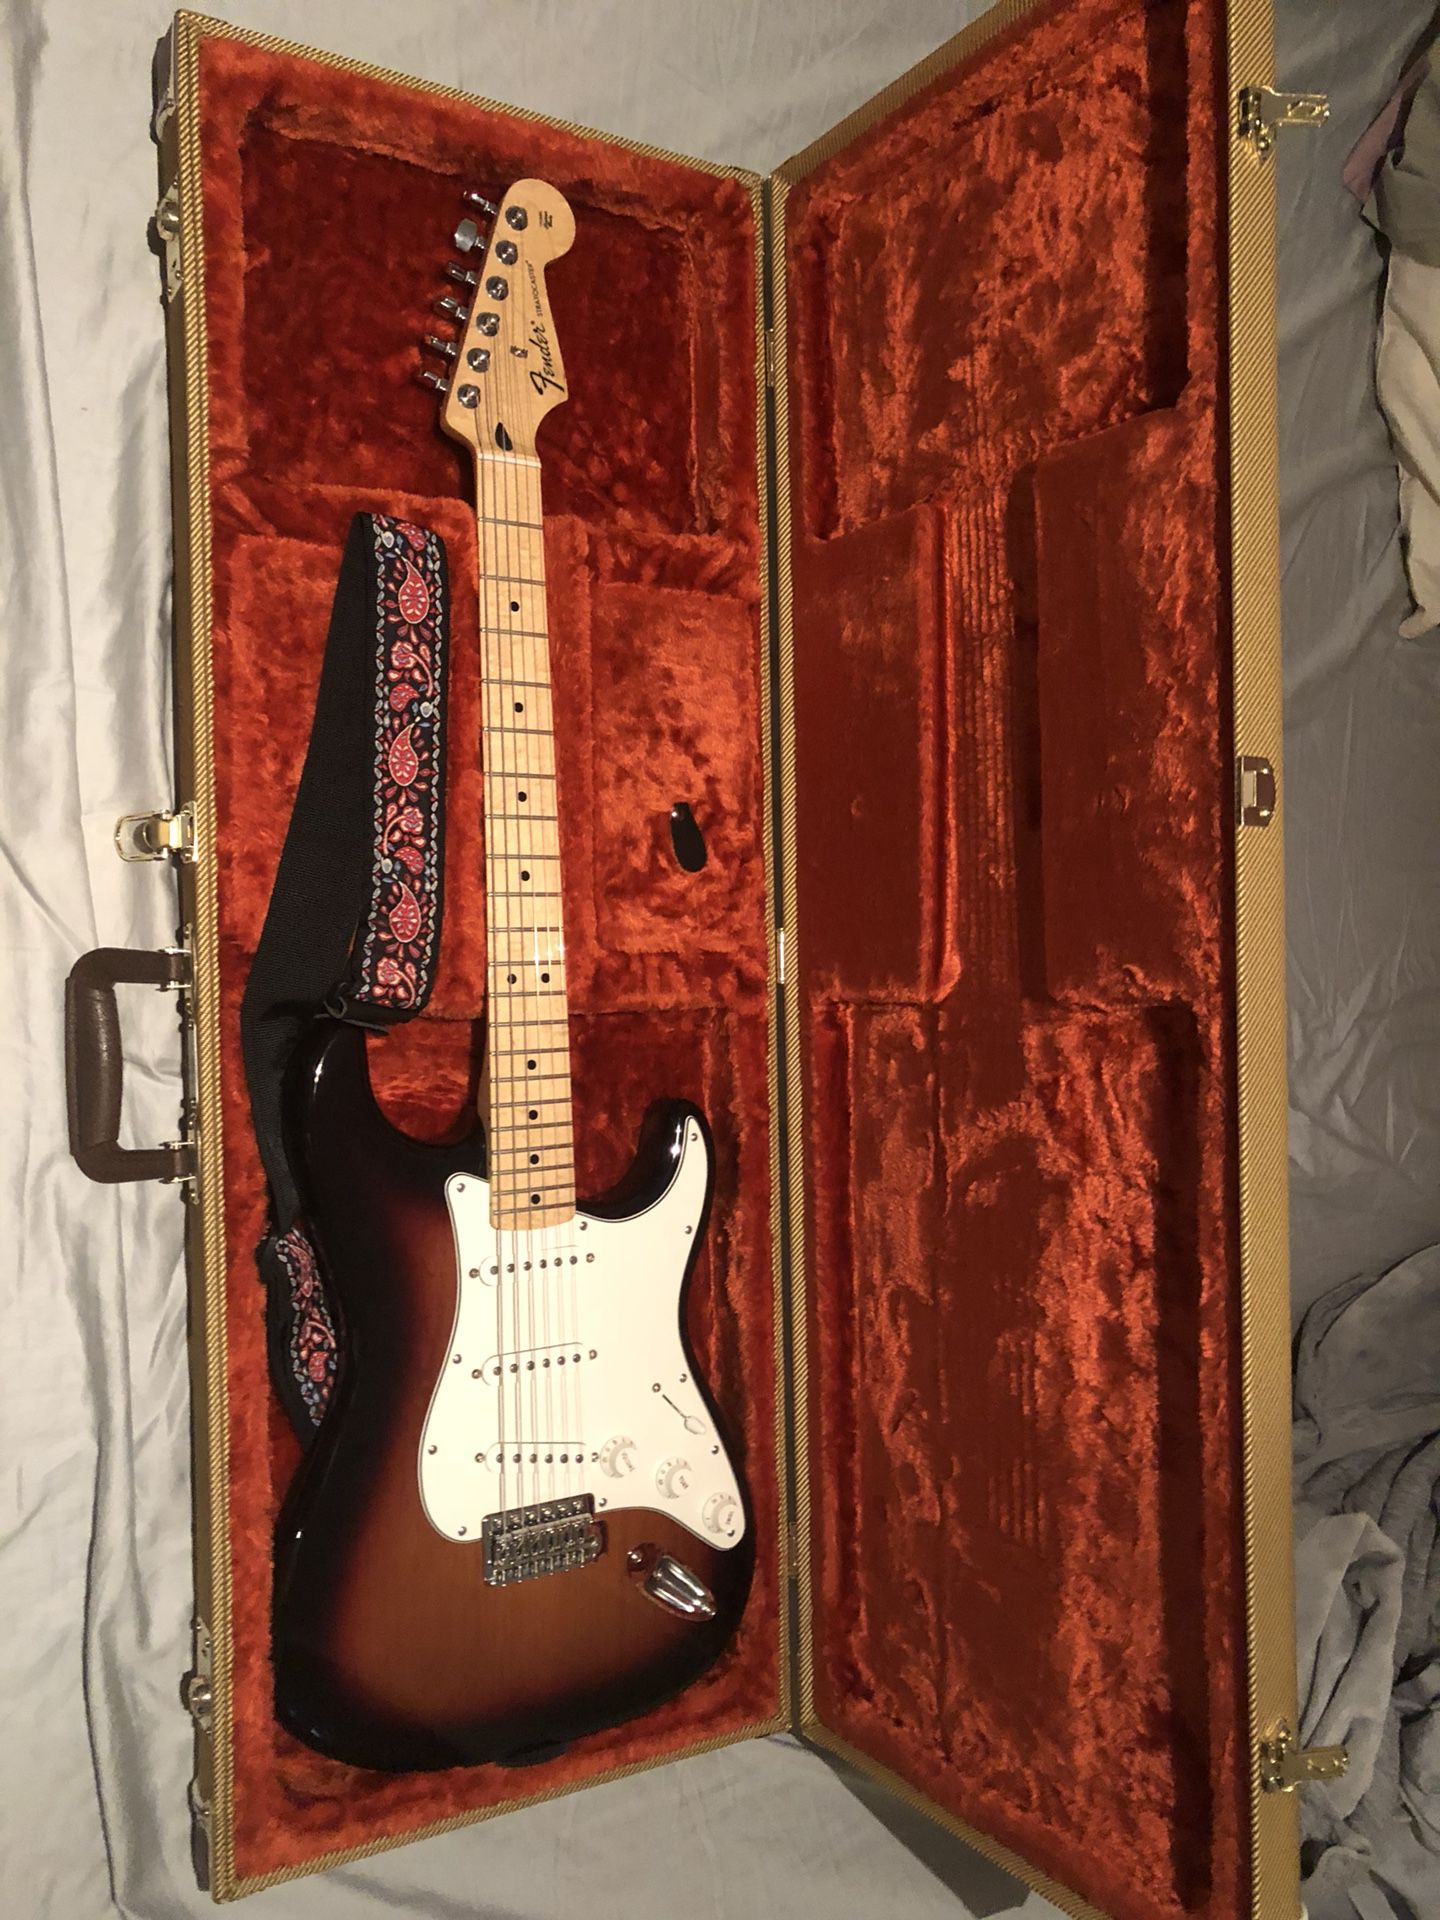 Fender Standard Stratocaster w/ fender tweed case and locking tuners